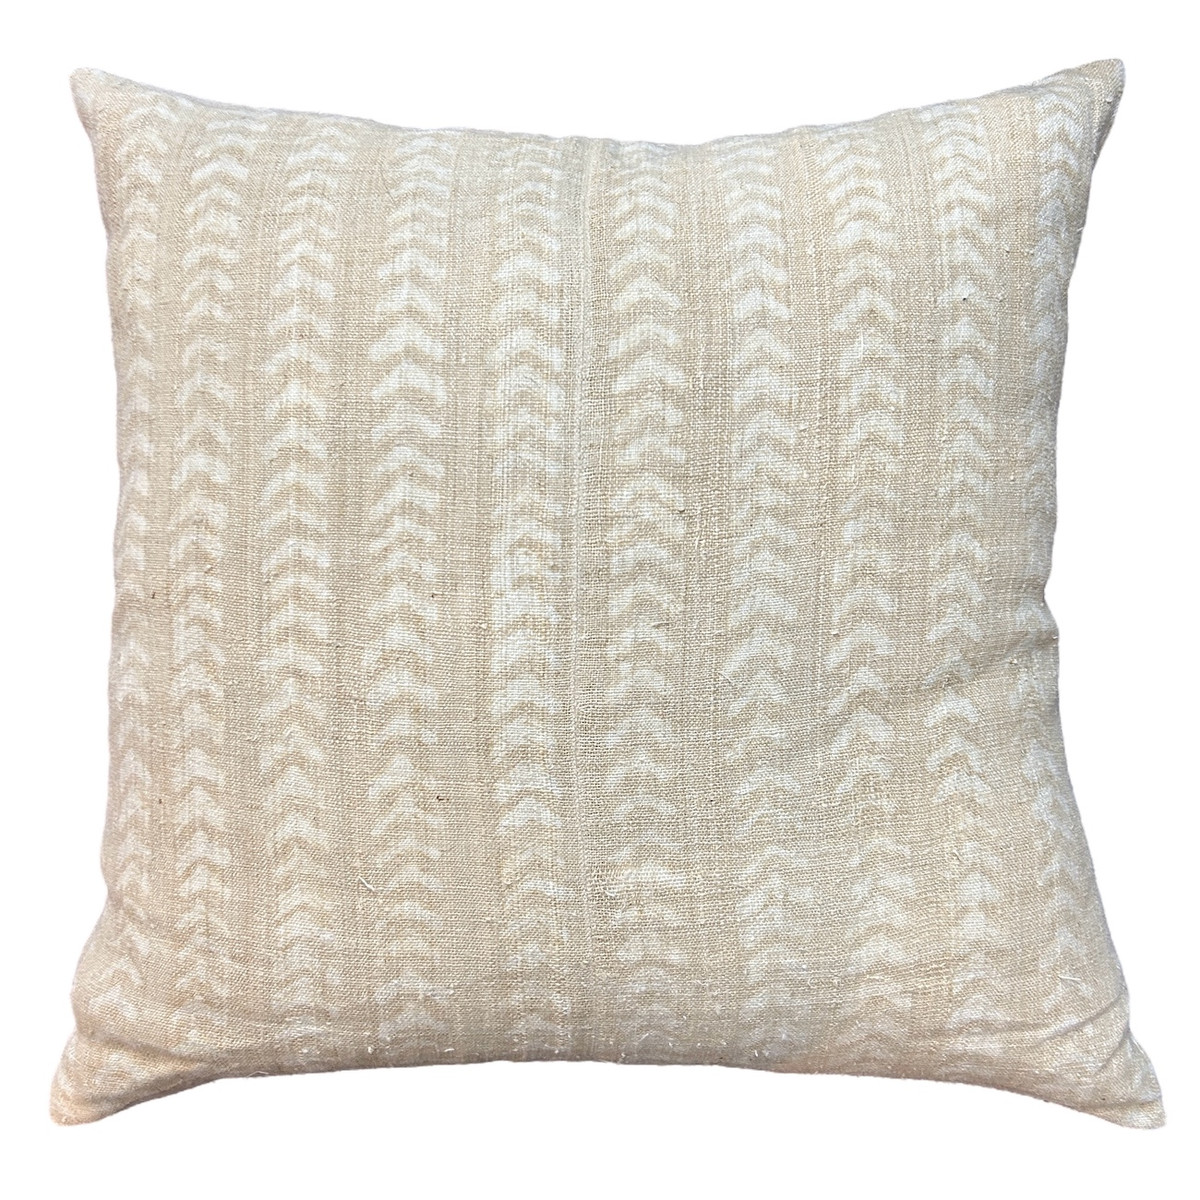 Handwoven and handspun hemp pillow. The pillow is block printed with a very subtle chevron pattern.  90/10 feather down insert, hidden zipper. Shades of cream to sand.